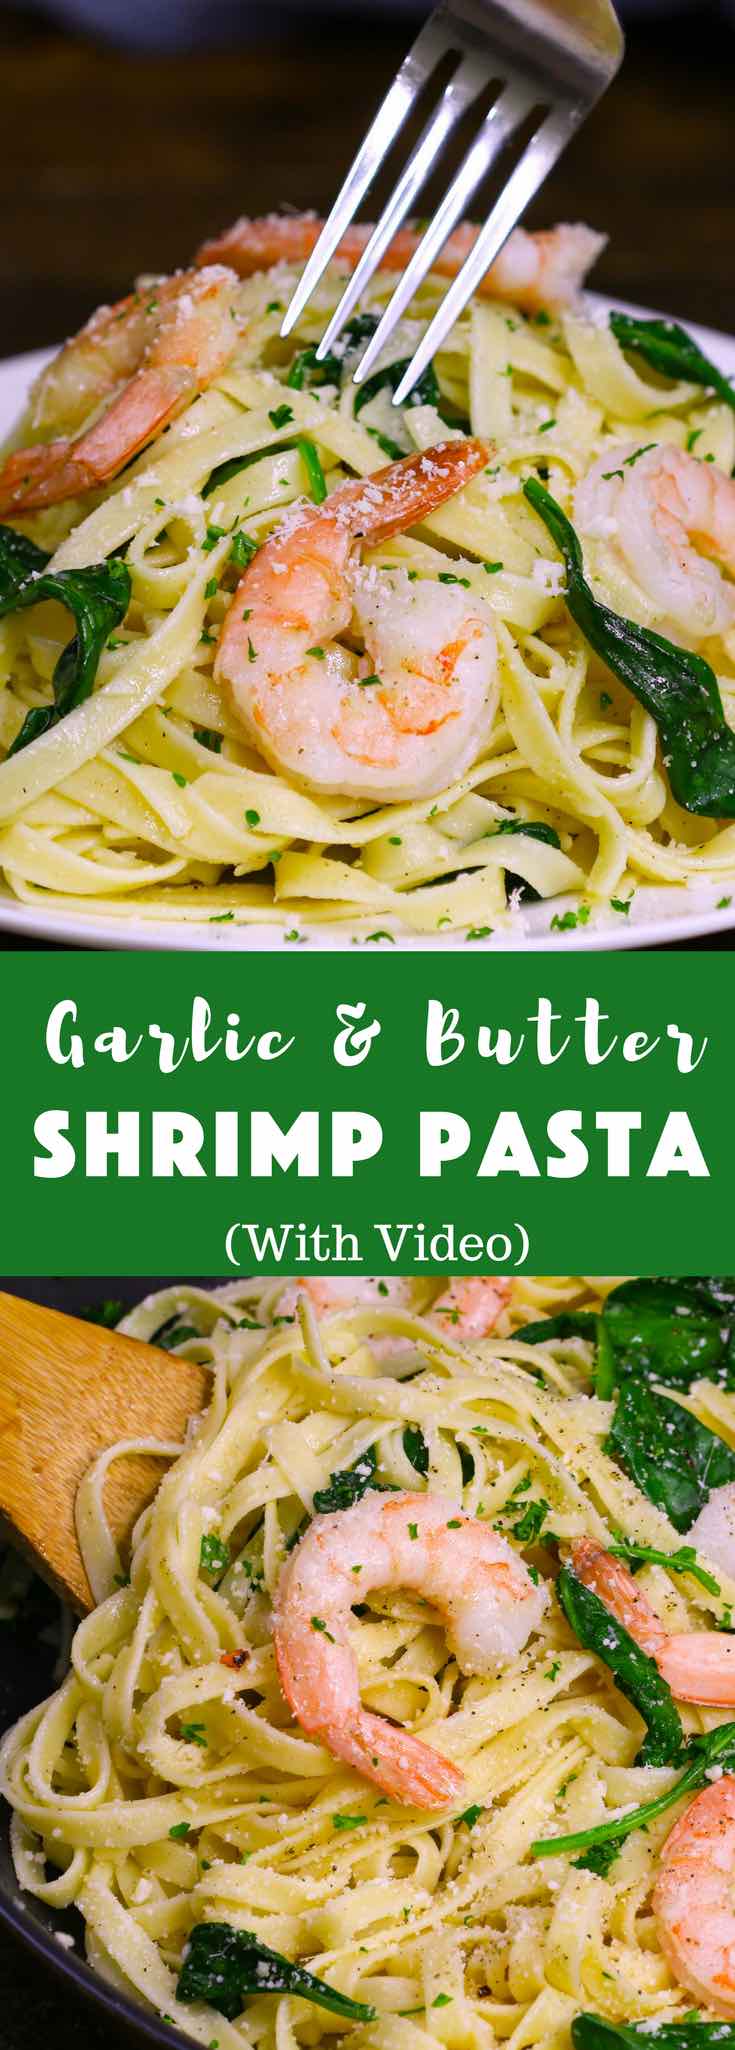 This Garlic Butter Shrimp Pasta is a simple and incredibly delicious one pot meal you can make in under 30 minutes. It’s a quick and easy dish that’s restaurant quality. Plus recipe video tutorial! #shrimpPasta